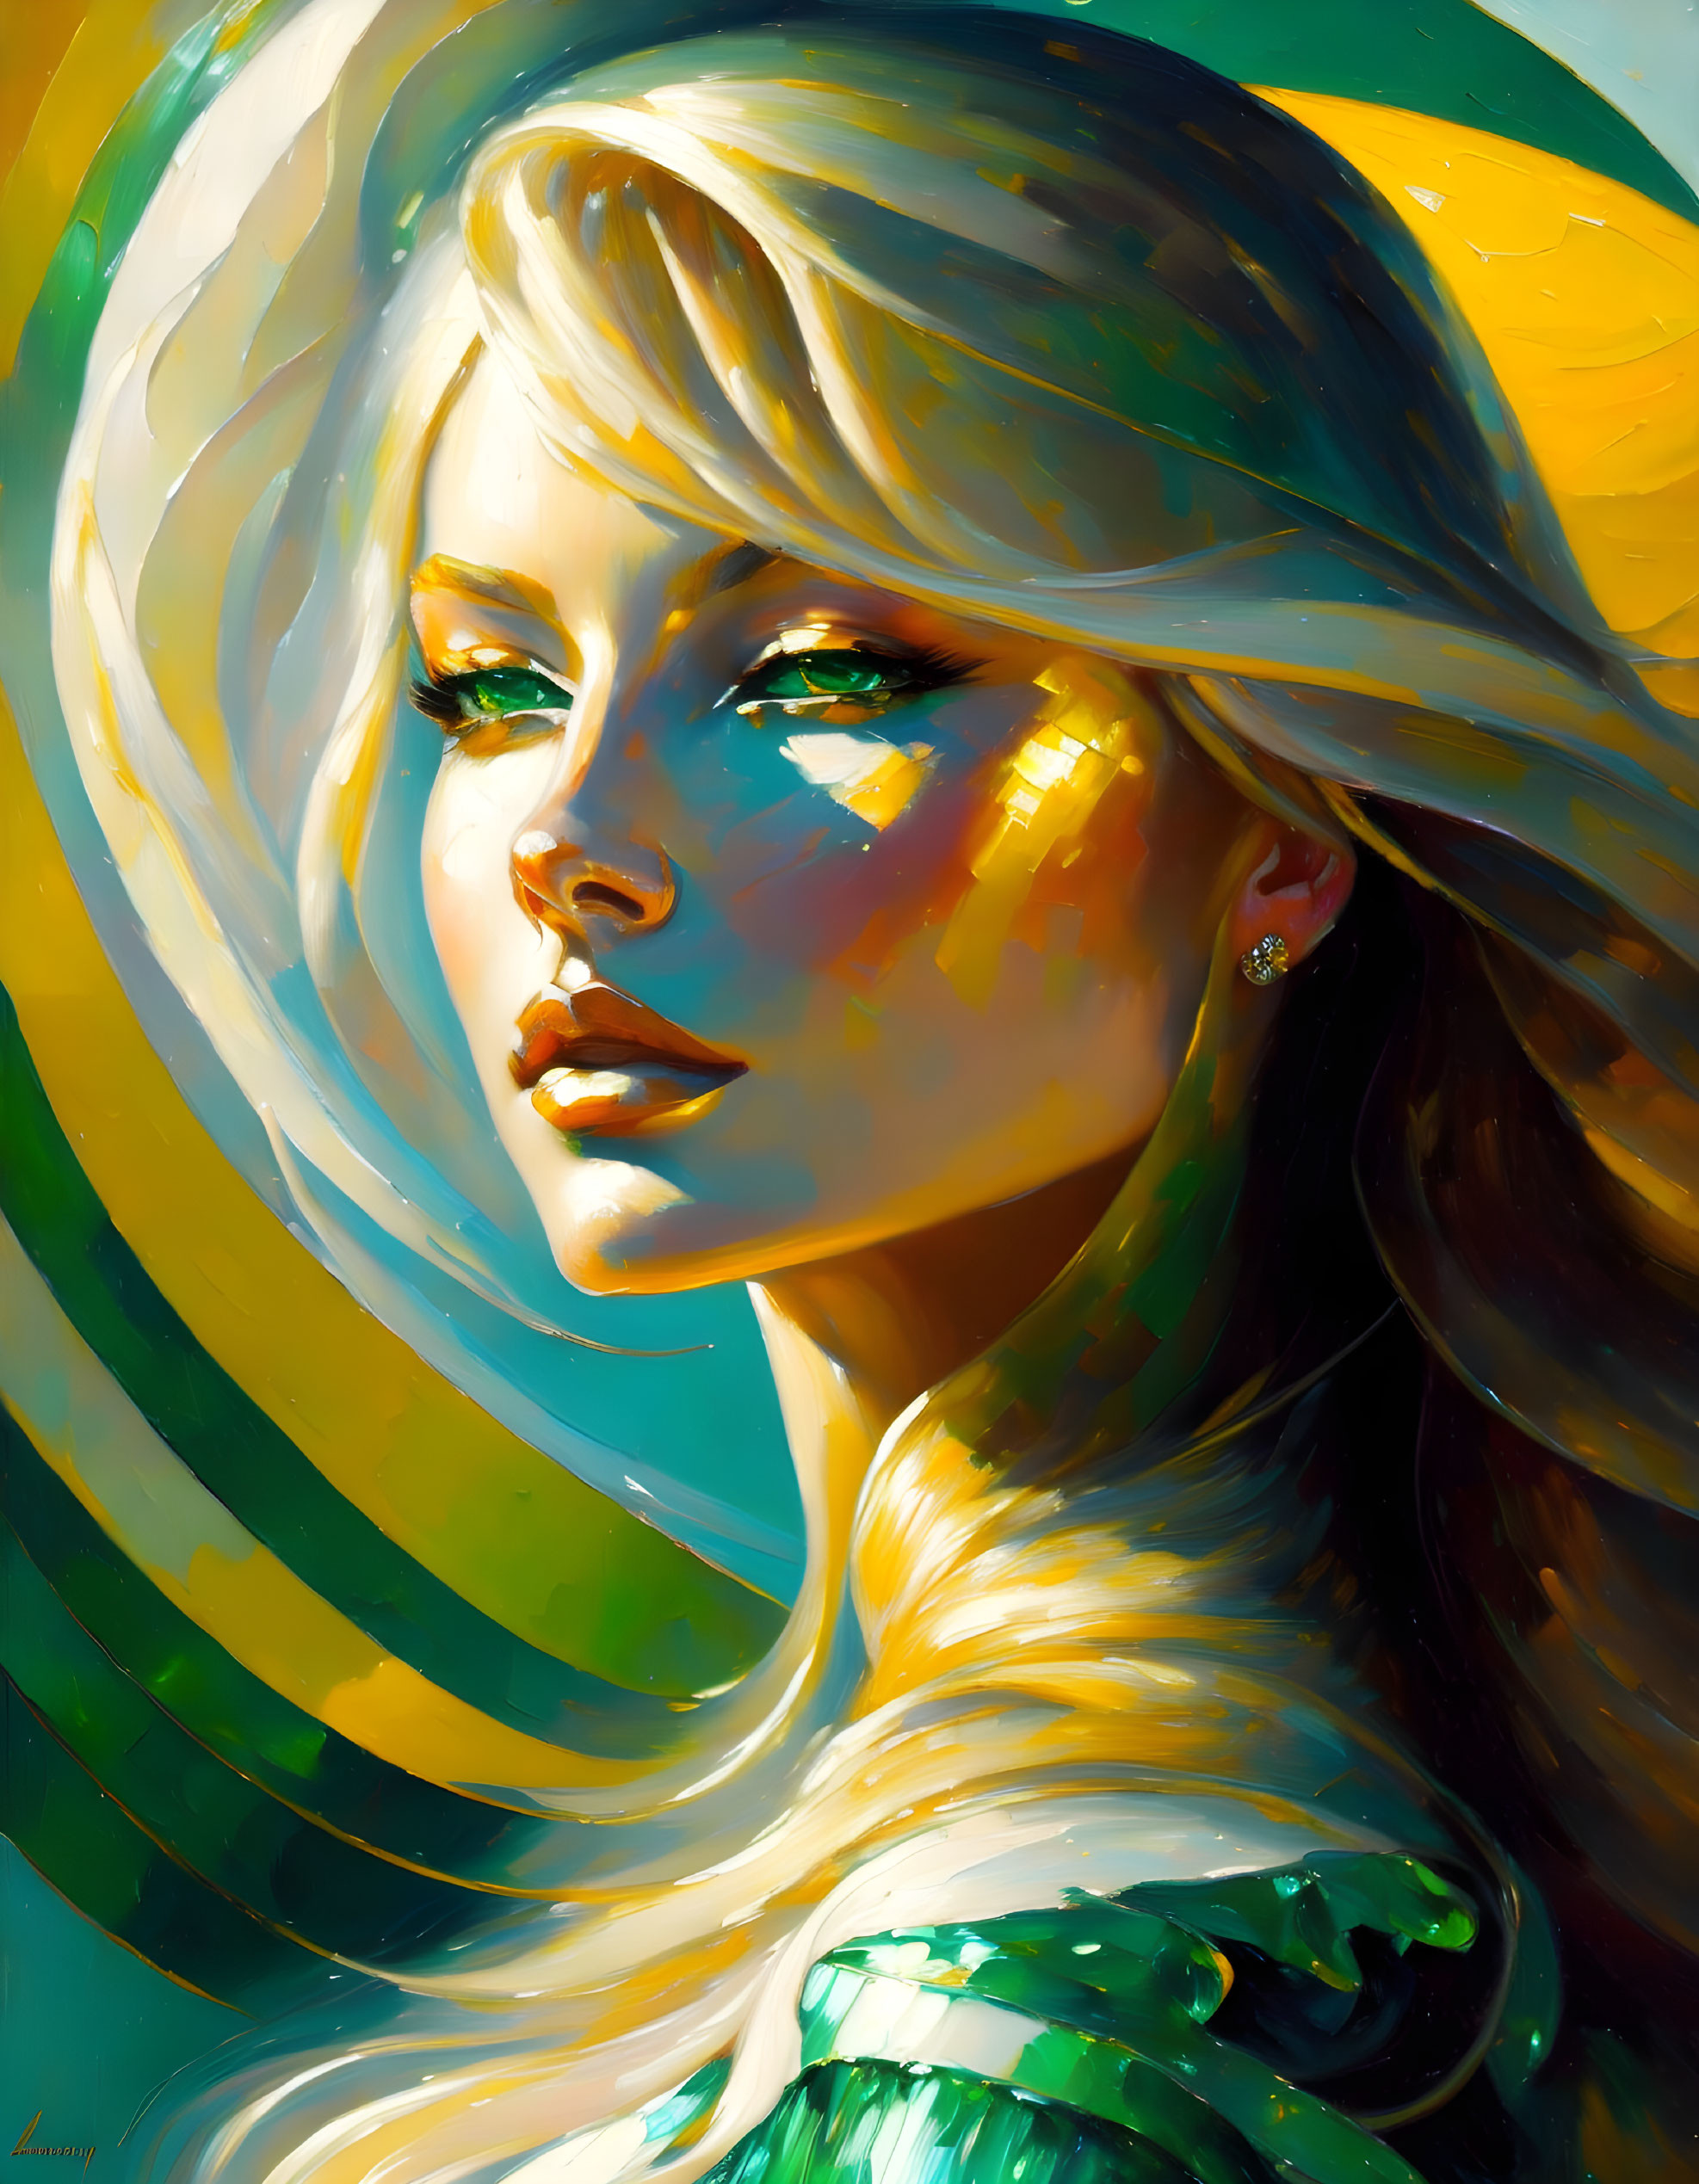 Vibrant illustration of woman with golden hair and blue eyes